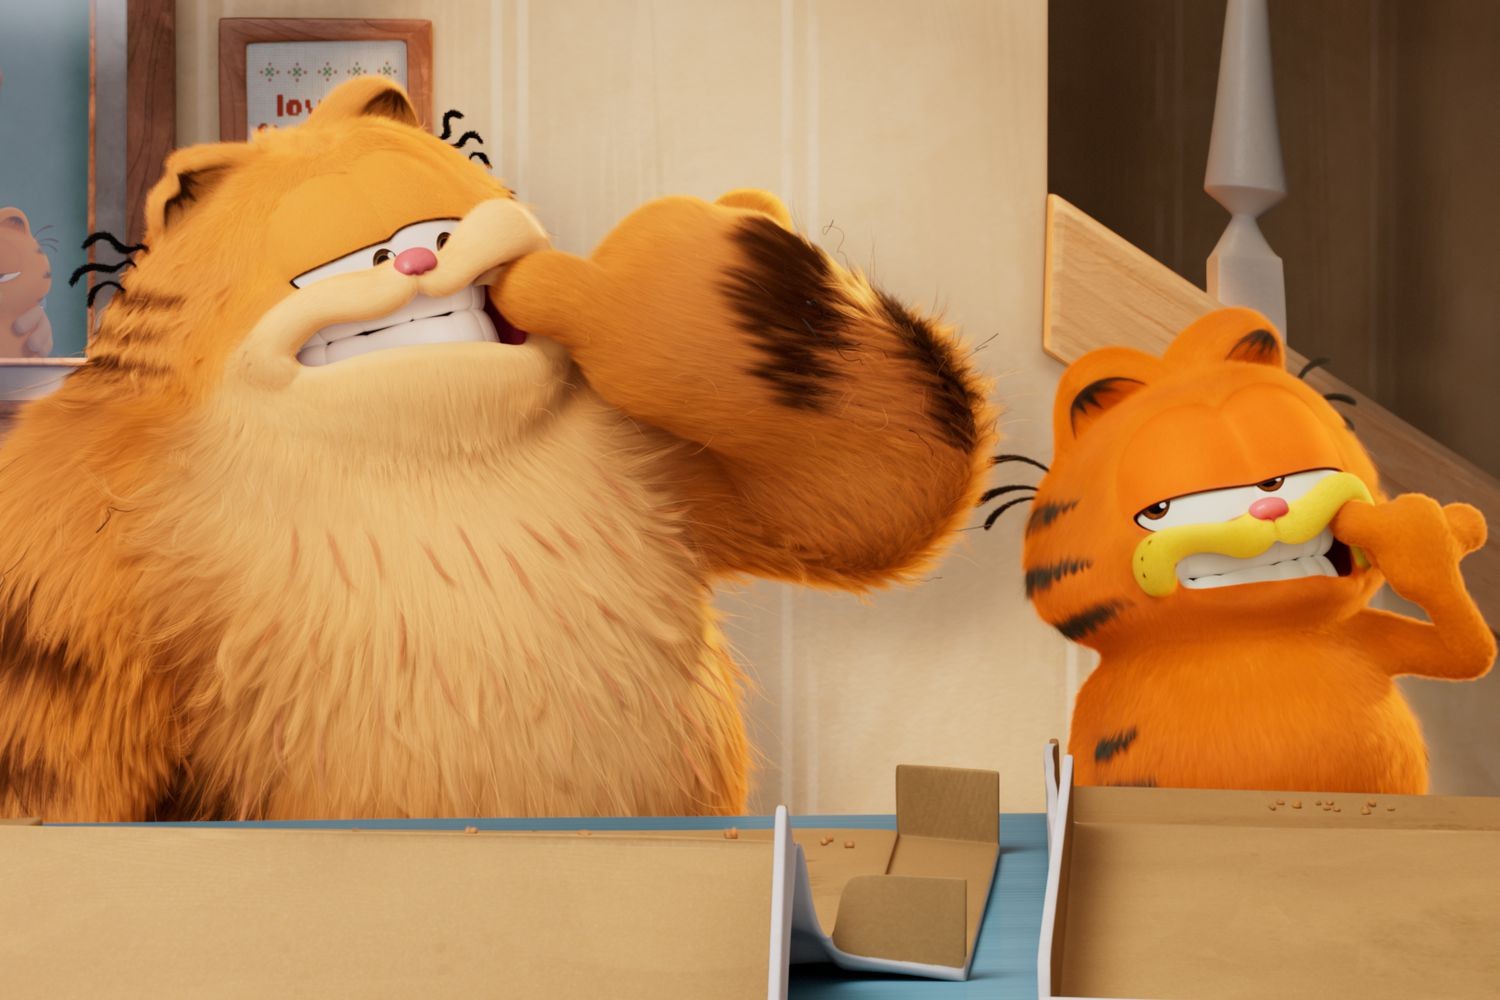 Chris Pratt recently voiced Garfield in The Garfield Movie which was a hit | Sony Pictures Releasing